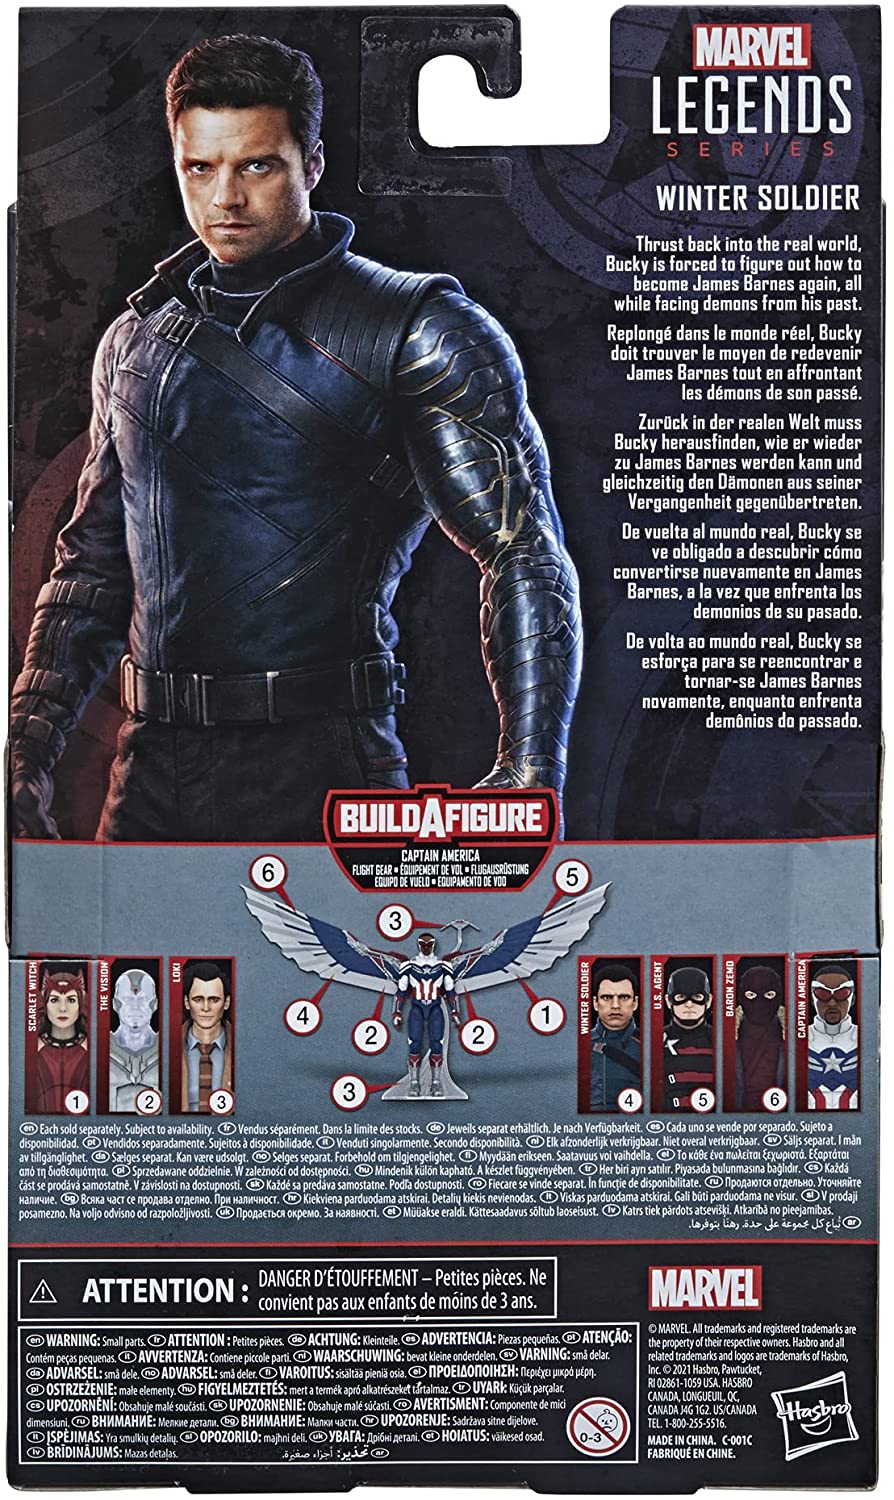 Hasbro Marvel Legends Series Avengers 15-cm Action Figure Toy Winter Soldier, Premium Design And 2 Accessories, For Kids Age 4 and Up Marvel Avengers multicolor